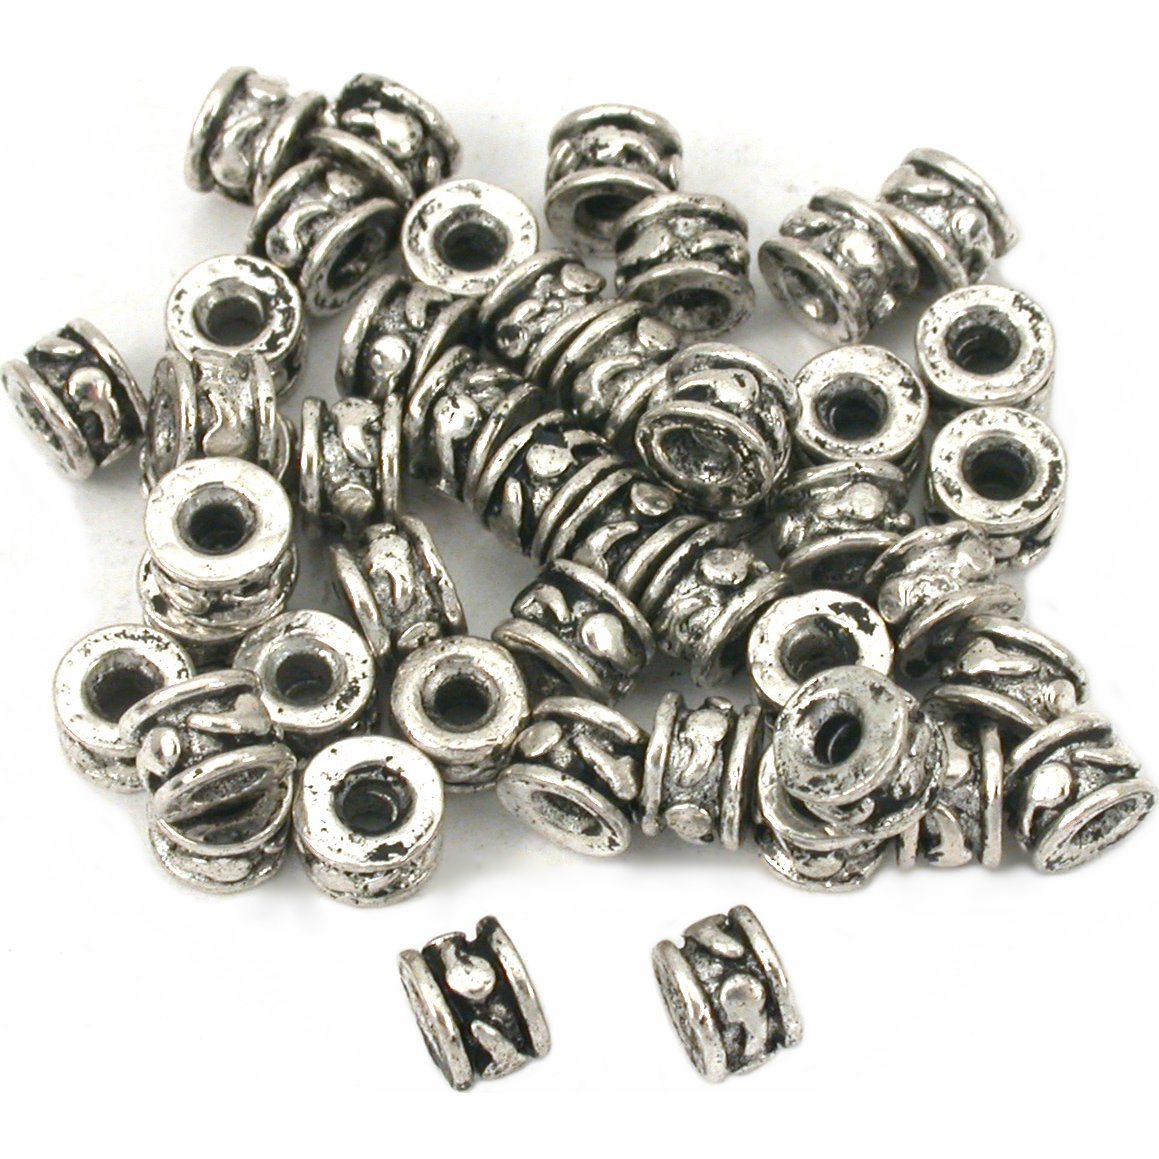 Bali Spacer Beads Antique Silver Plated 5mm 40Pcs Approx.